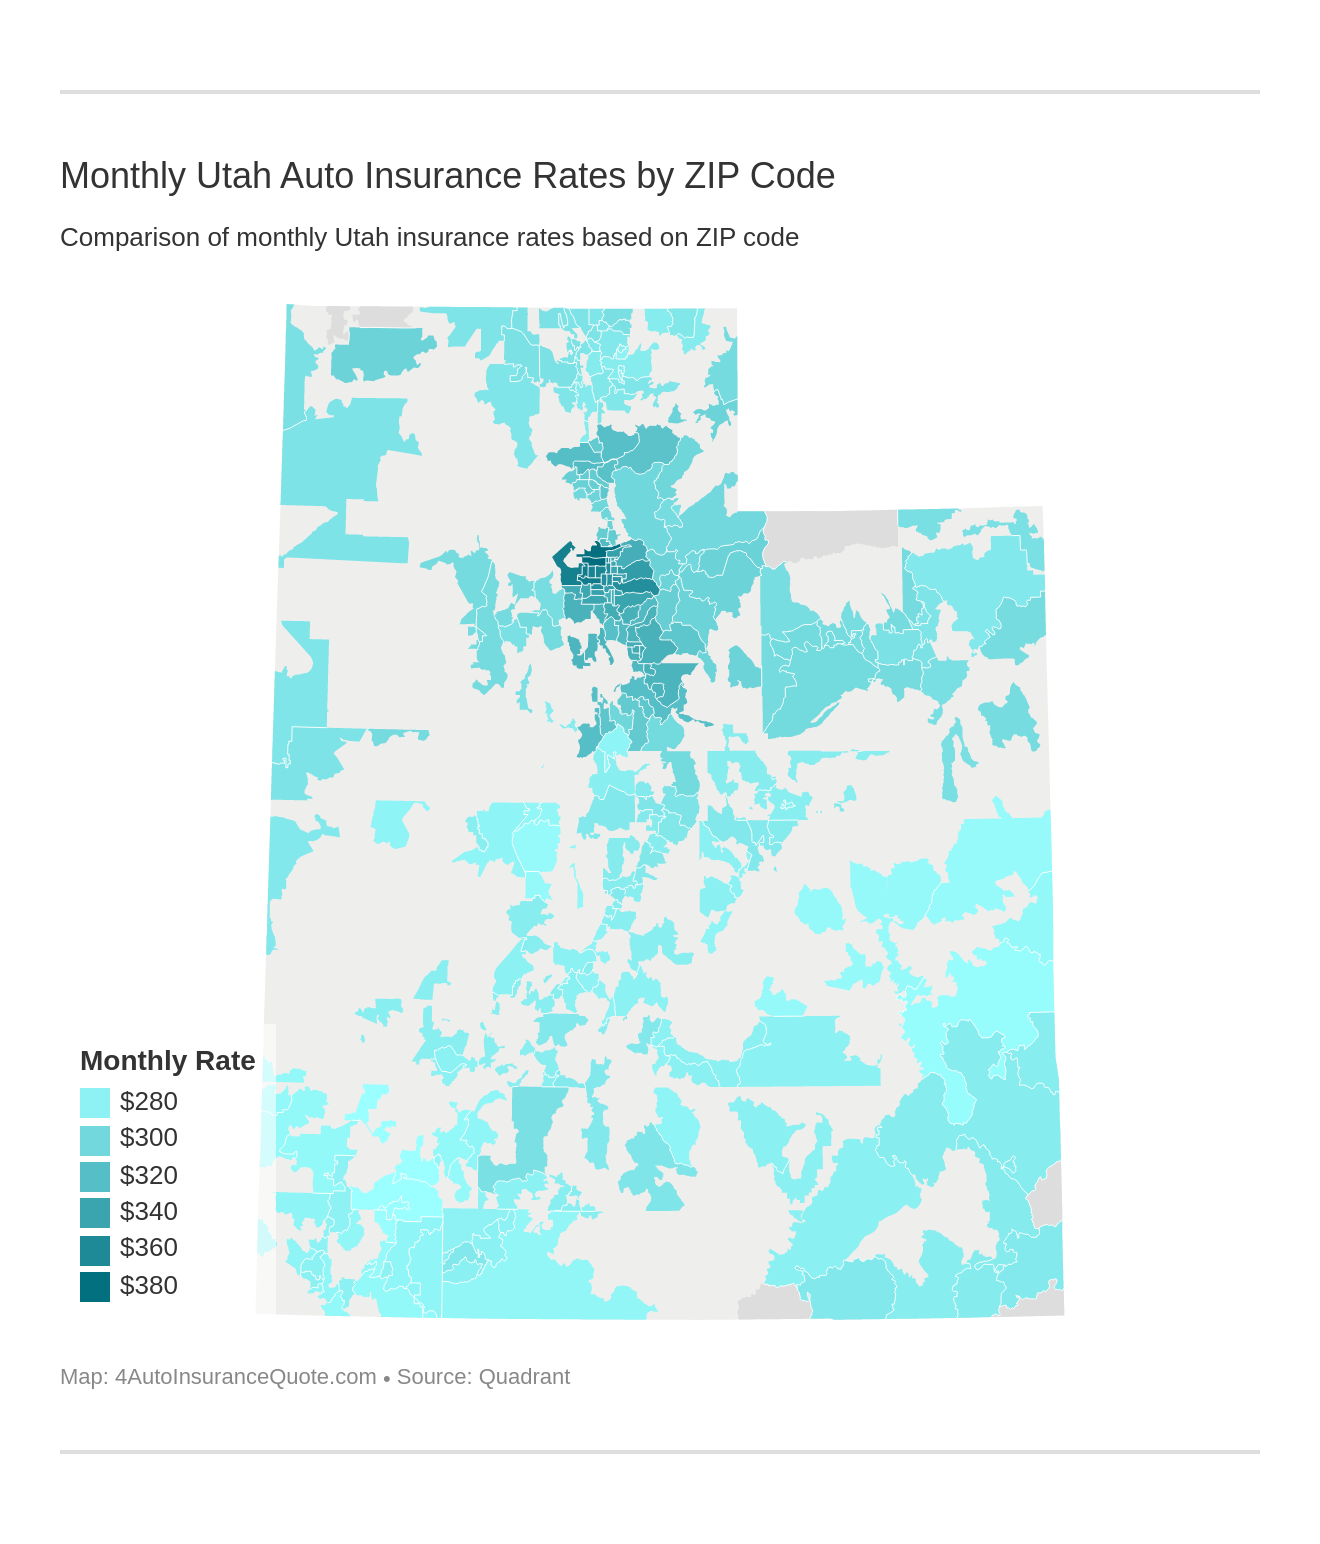 Monthly Utah Auto Insurance Rates by ZIP Code